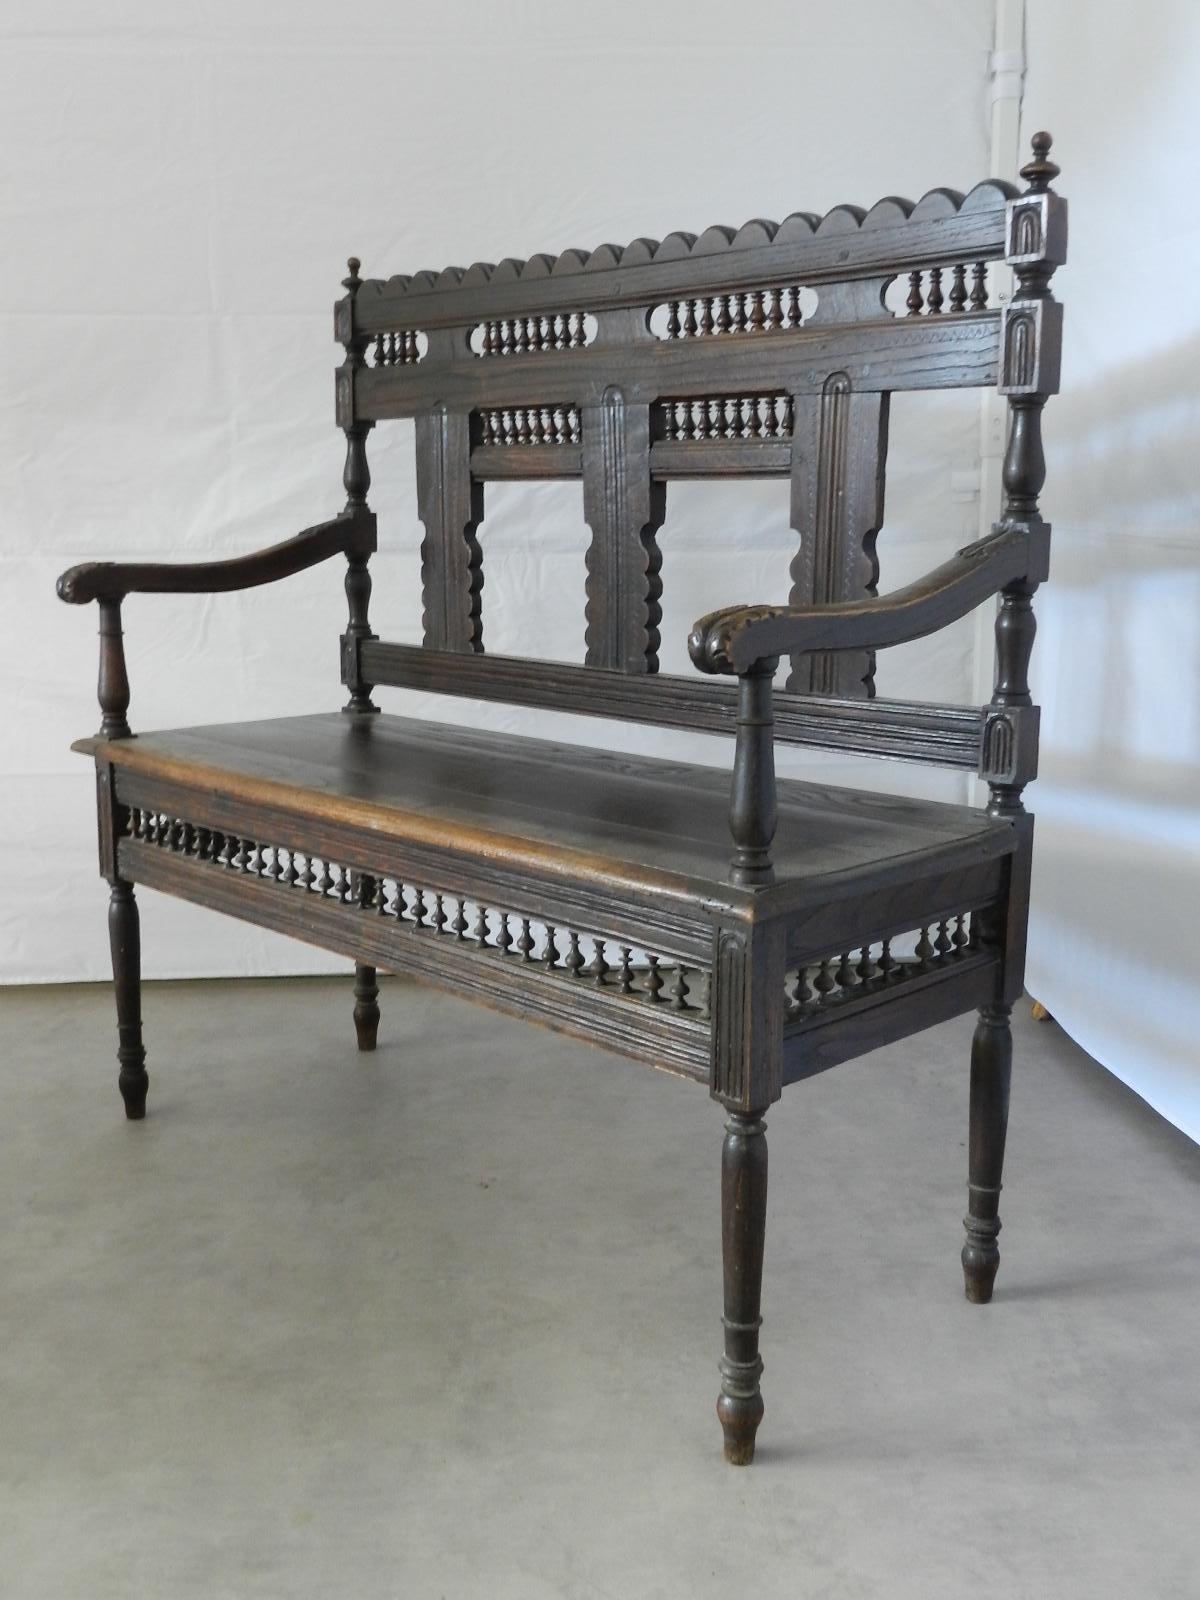 French hall bench, circa 1910
Open arm with inset turnings
Attractive settle would look great in any room
French Provincial carved chestnut
In good vintage condition with minor signs of use for its age, one turning is missing on one side hard to